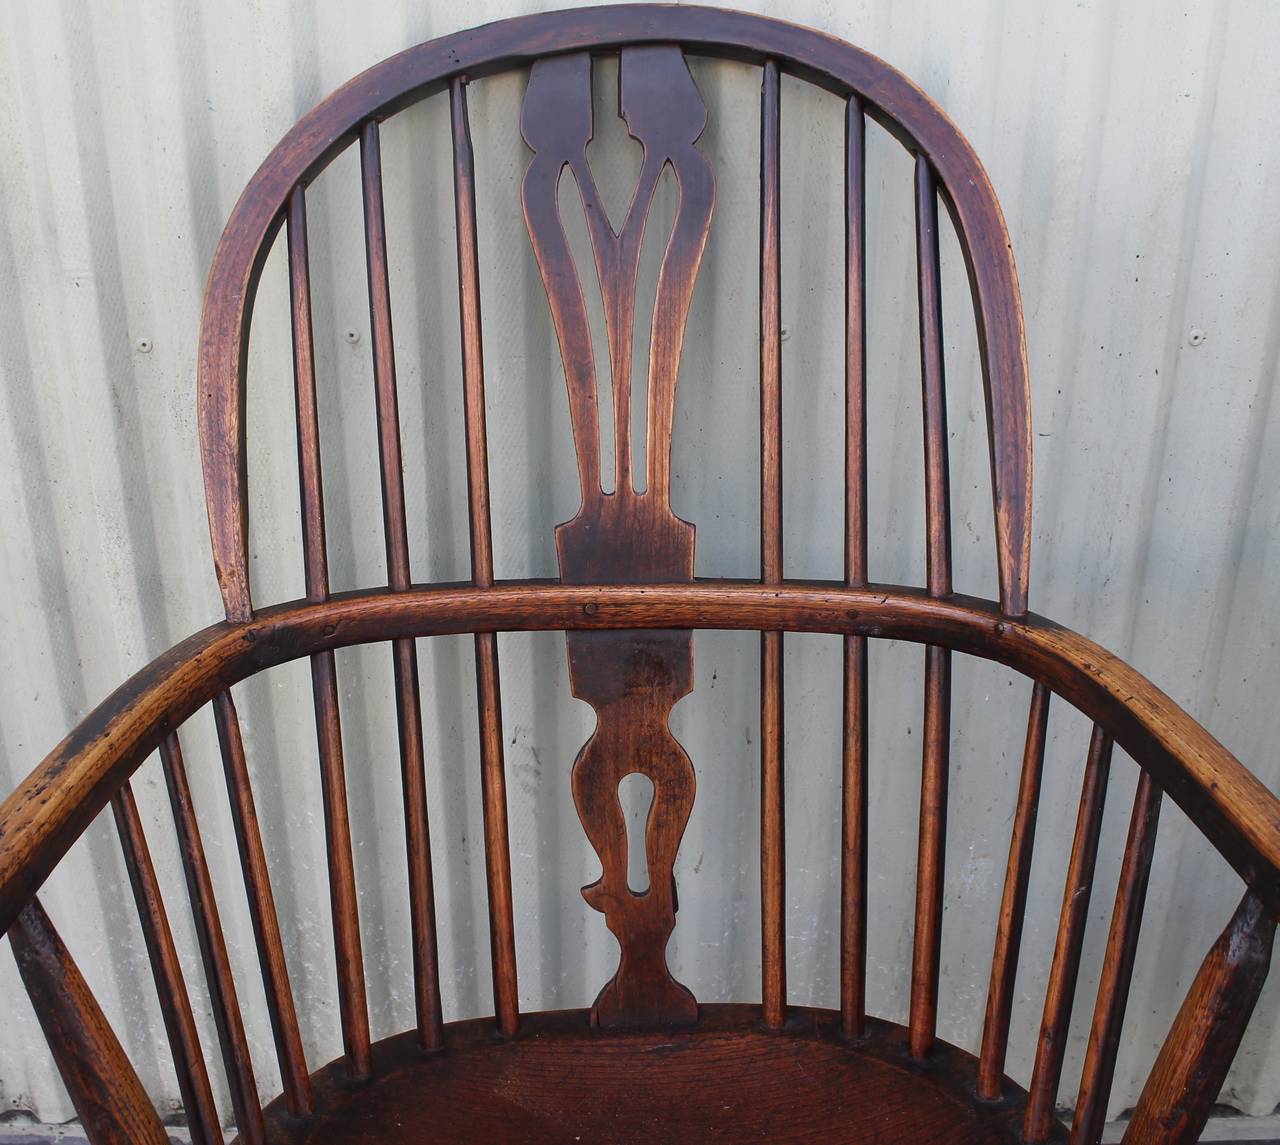 This pair of  Windsor chairs are in fantastic worn condition. They  are not a exact pair as one is shorter in height. They are made by the same hand and have all the same characteristics of each other. The worn comfortable feeling is what make them